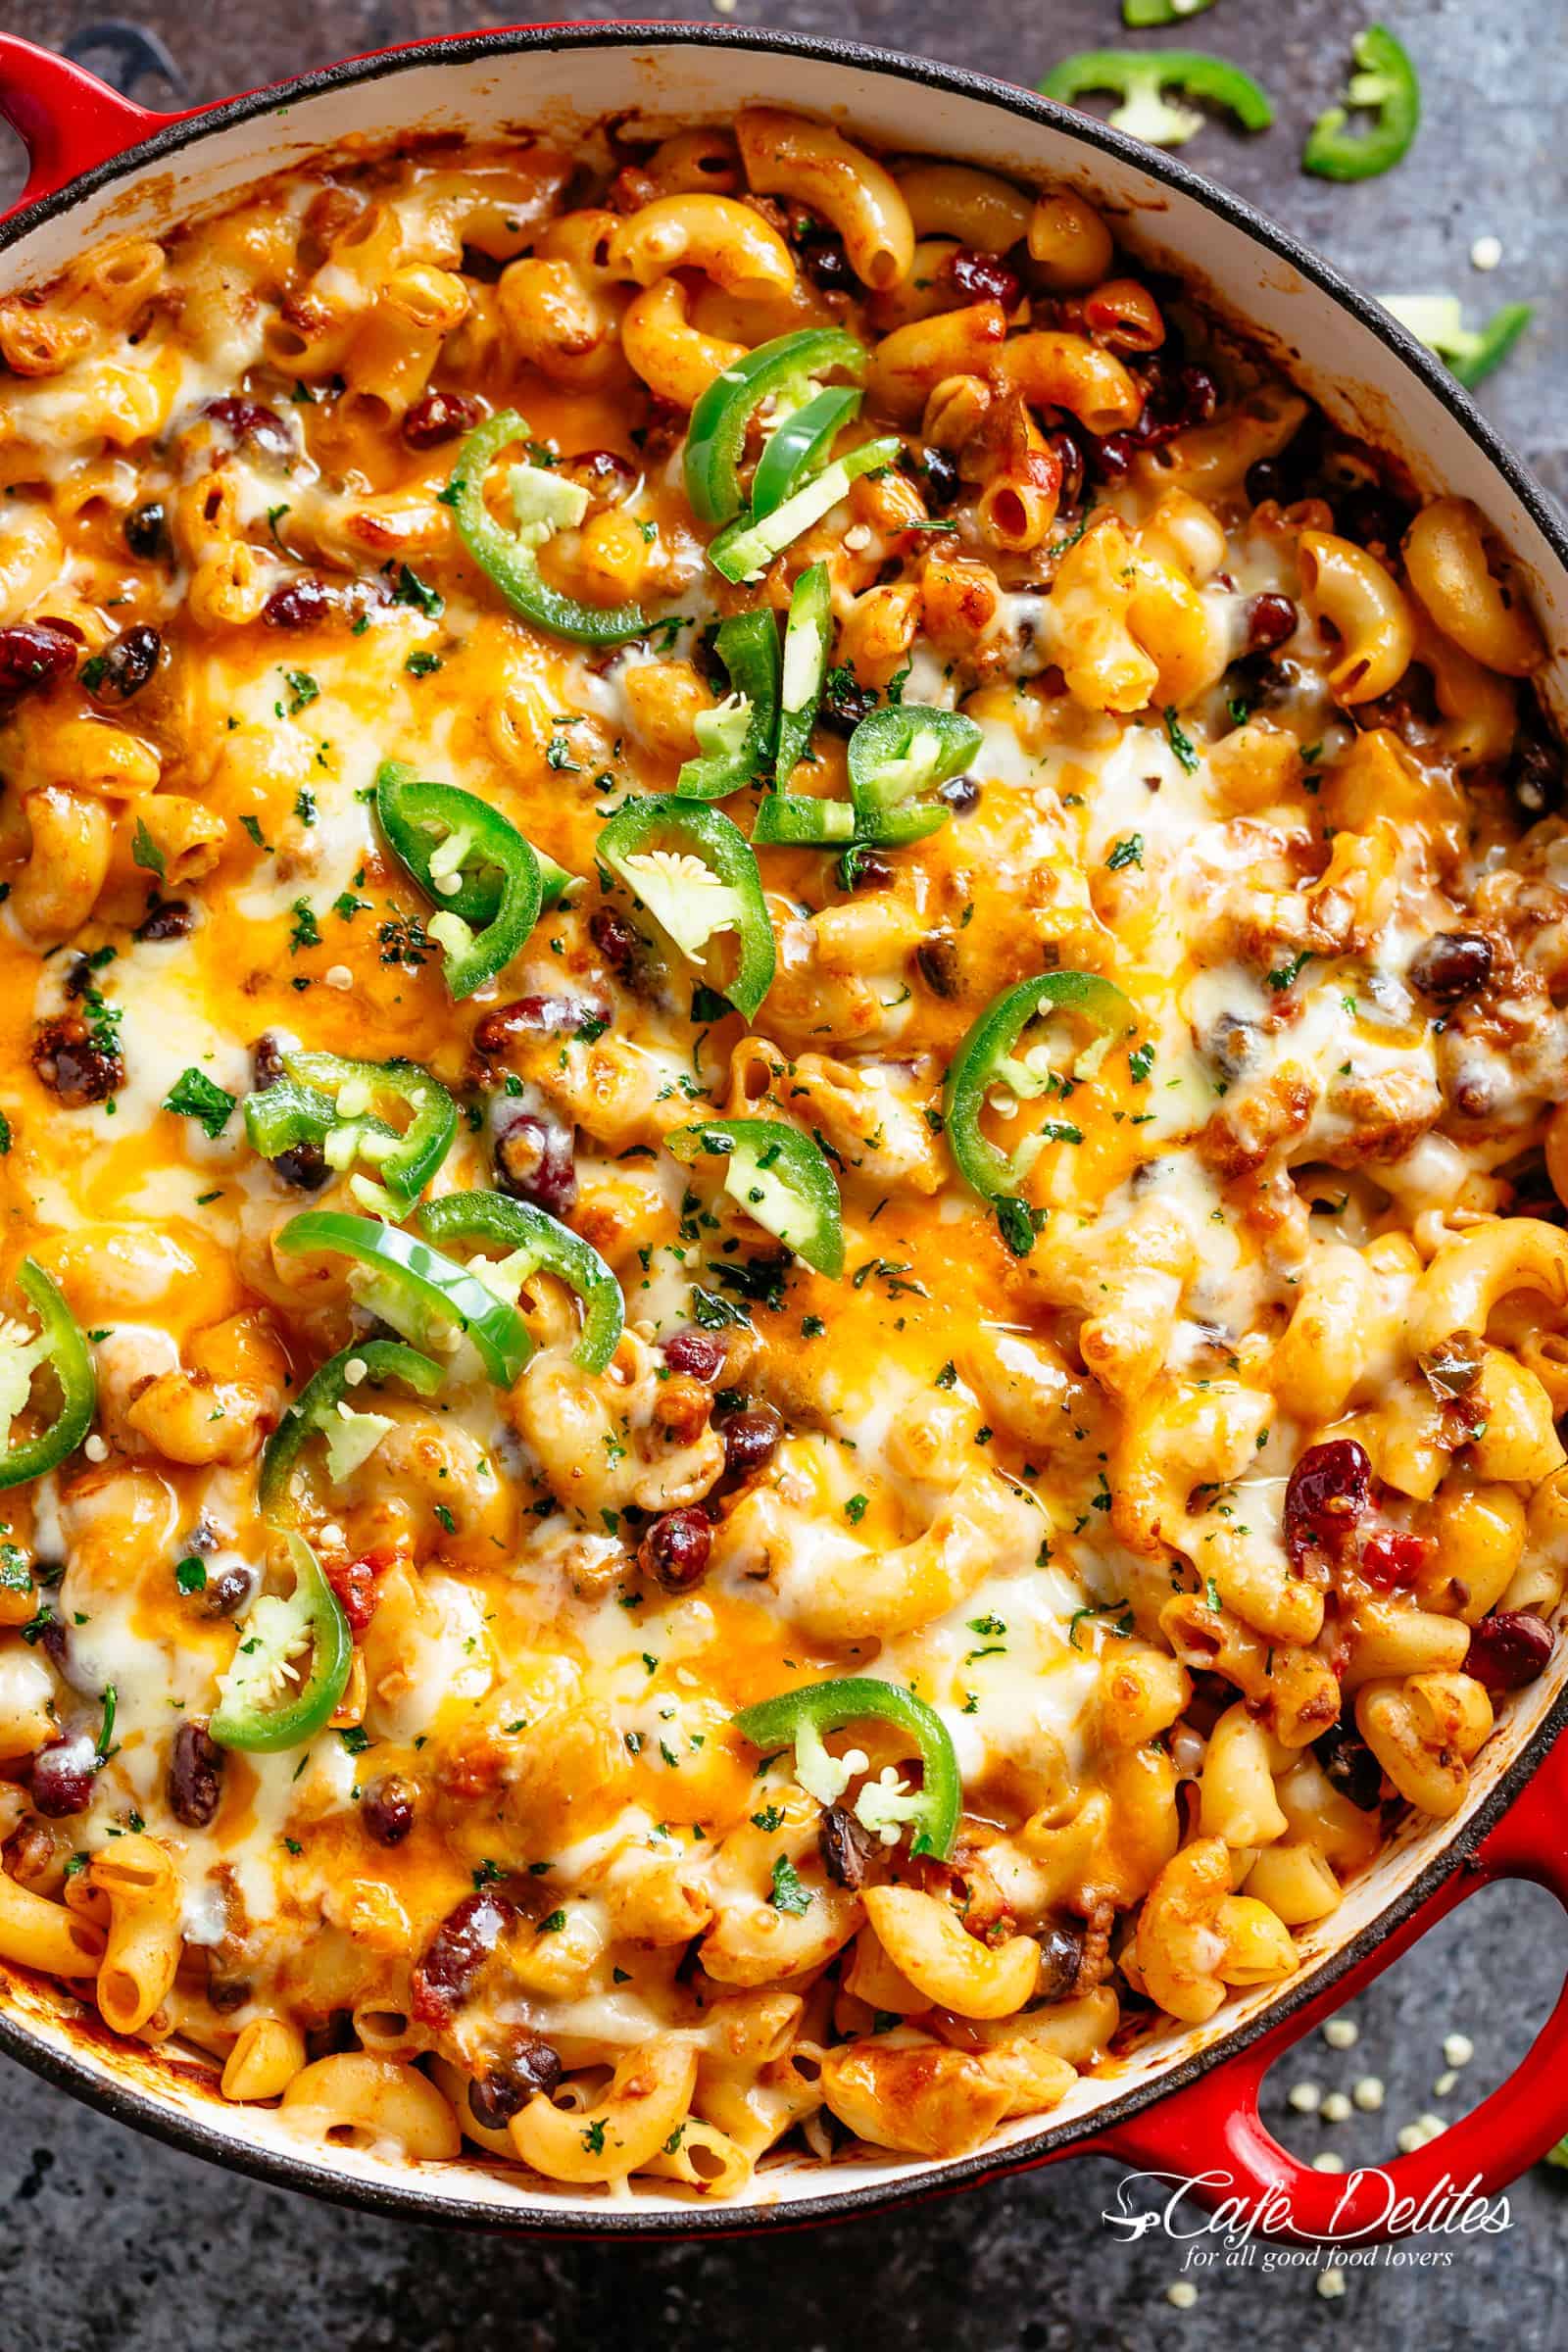 Chili Mac and Cheese with beans is the ultimate mash up of TWO favourites -- Chili PLUS Mac and Cheese! Using leftover chili OR chili made from scratch, this casserole is ready and on the table in less than 30 minutes! Incredible flavours that the whole family will go crazy for! | cafedelites.com